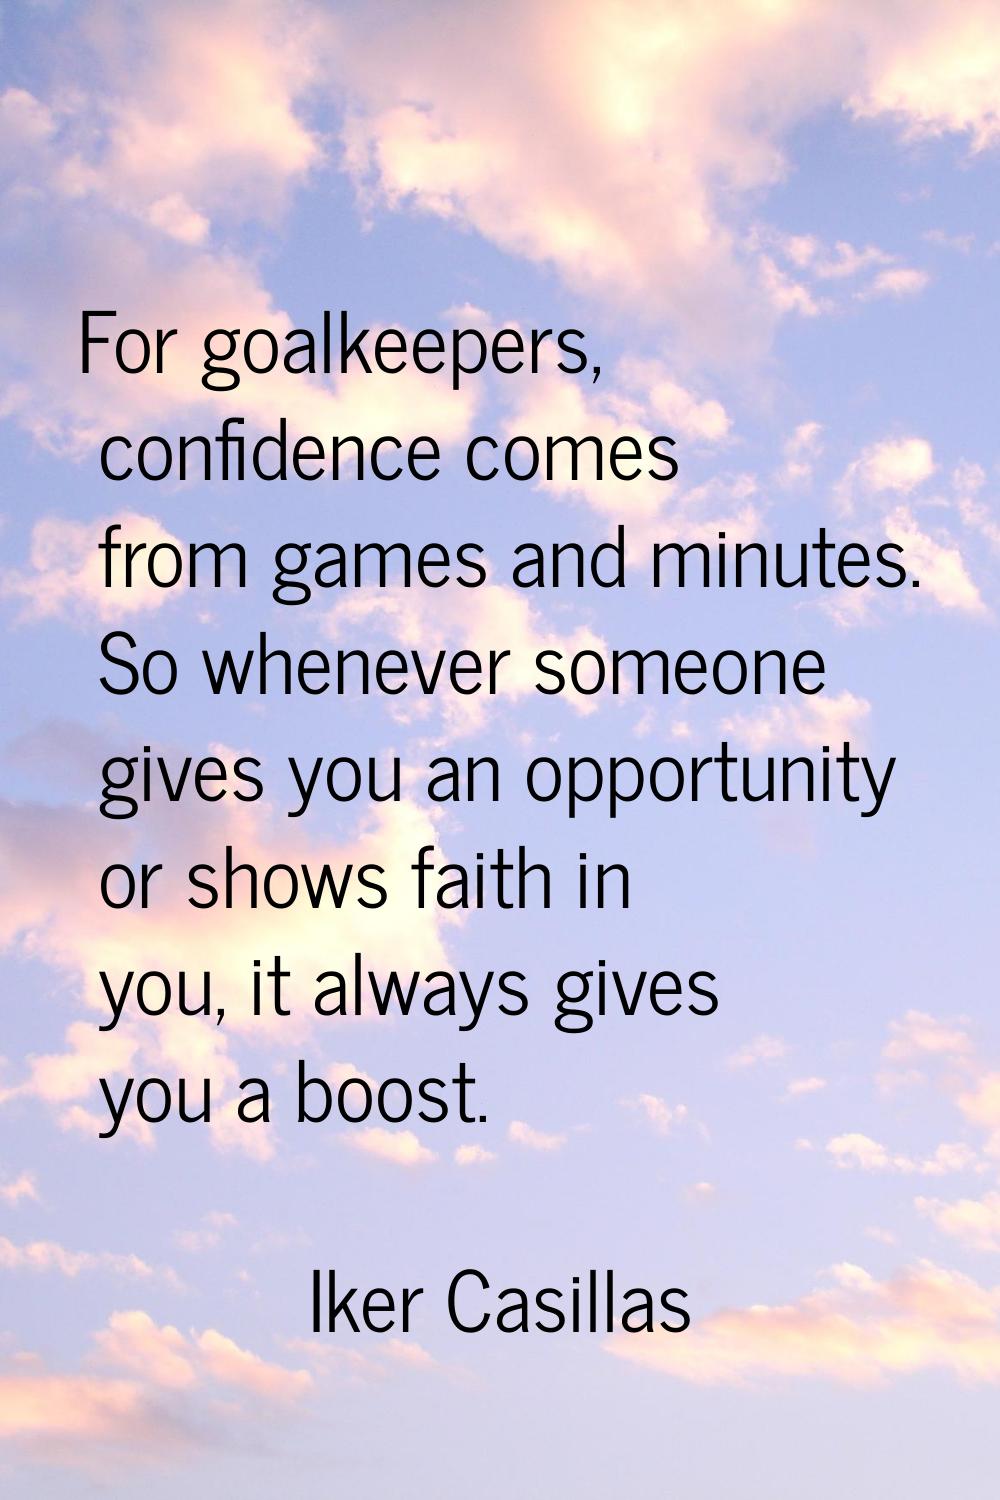 For goalkeepers, confidence comes from games and minutes. So whenever someone gives you an opportun